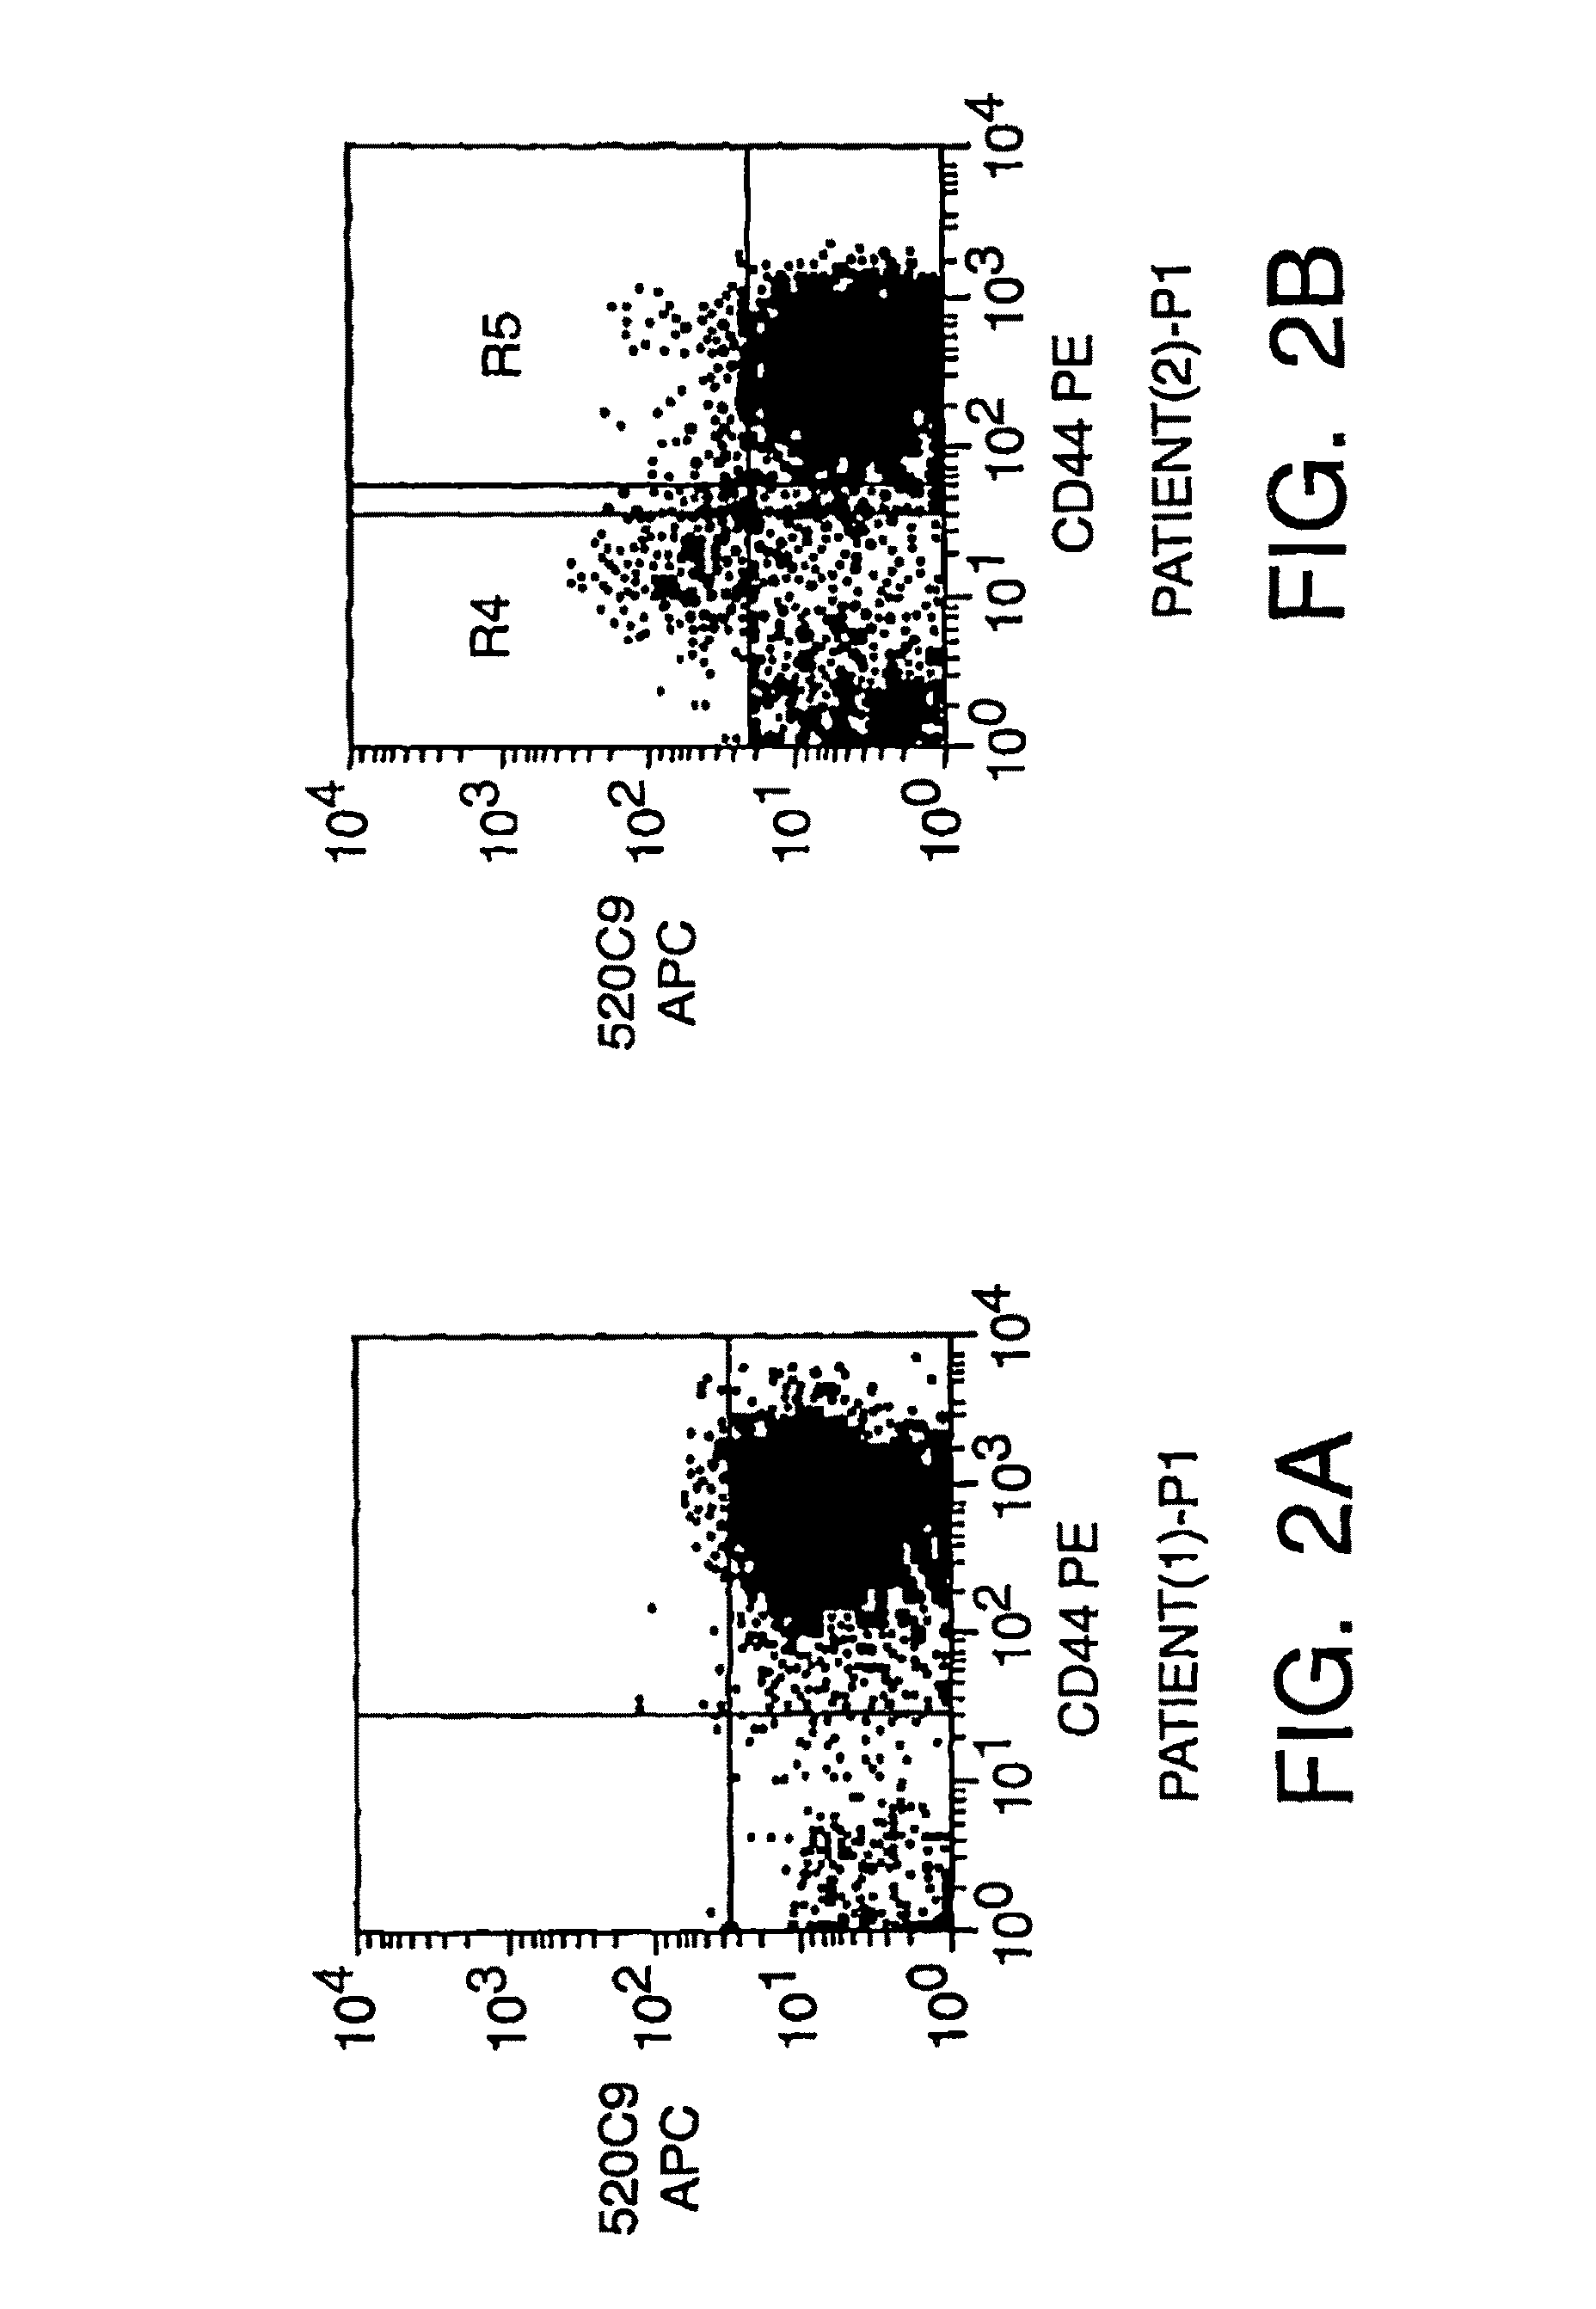 Determining the capability of a test compound to affect solid tumor stem cells